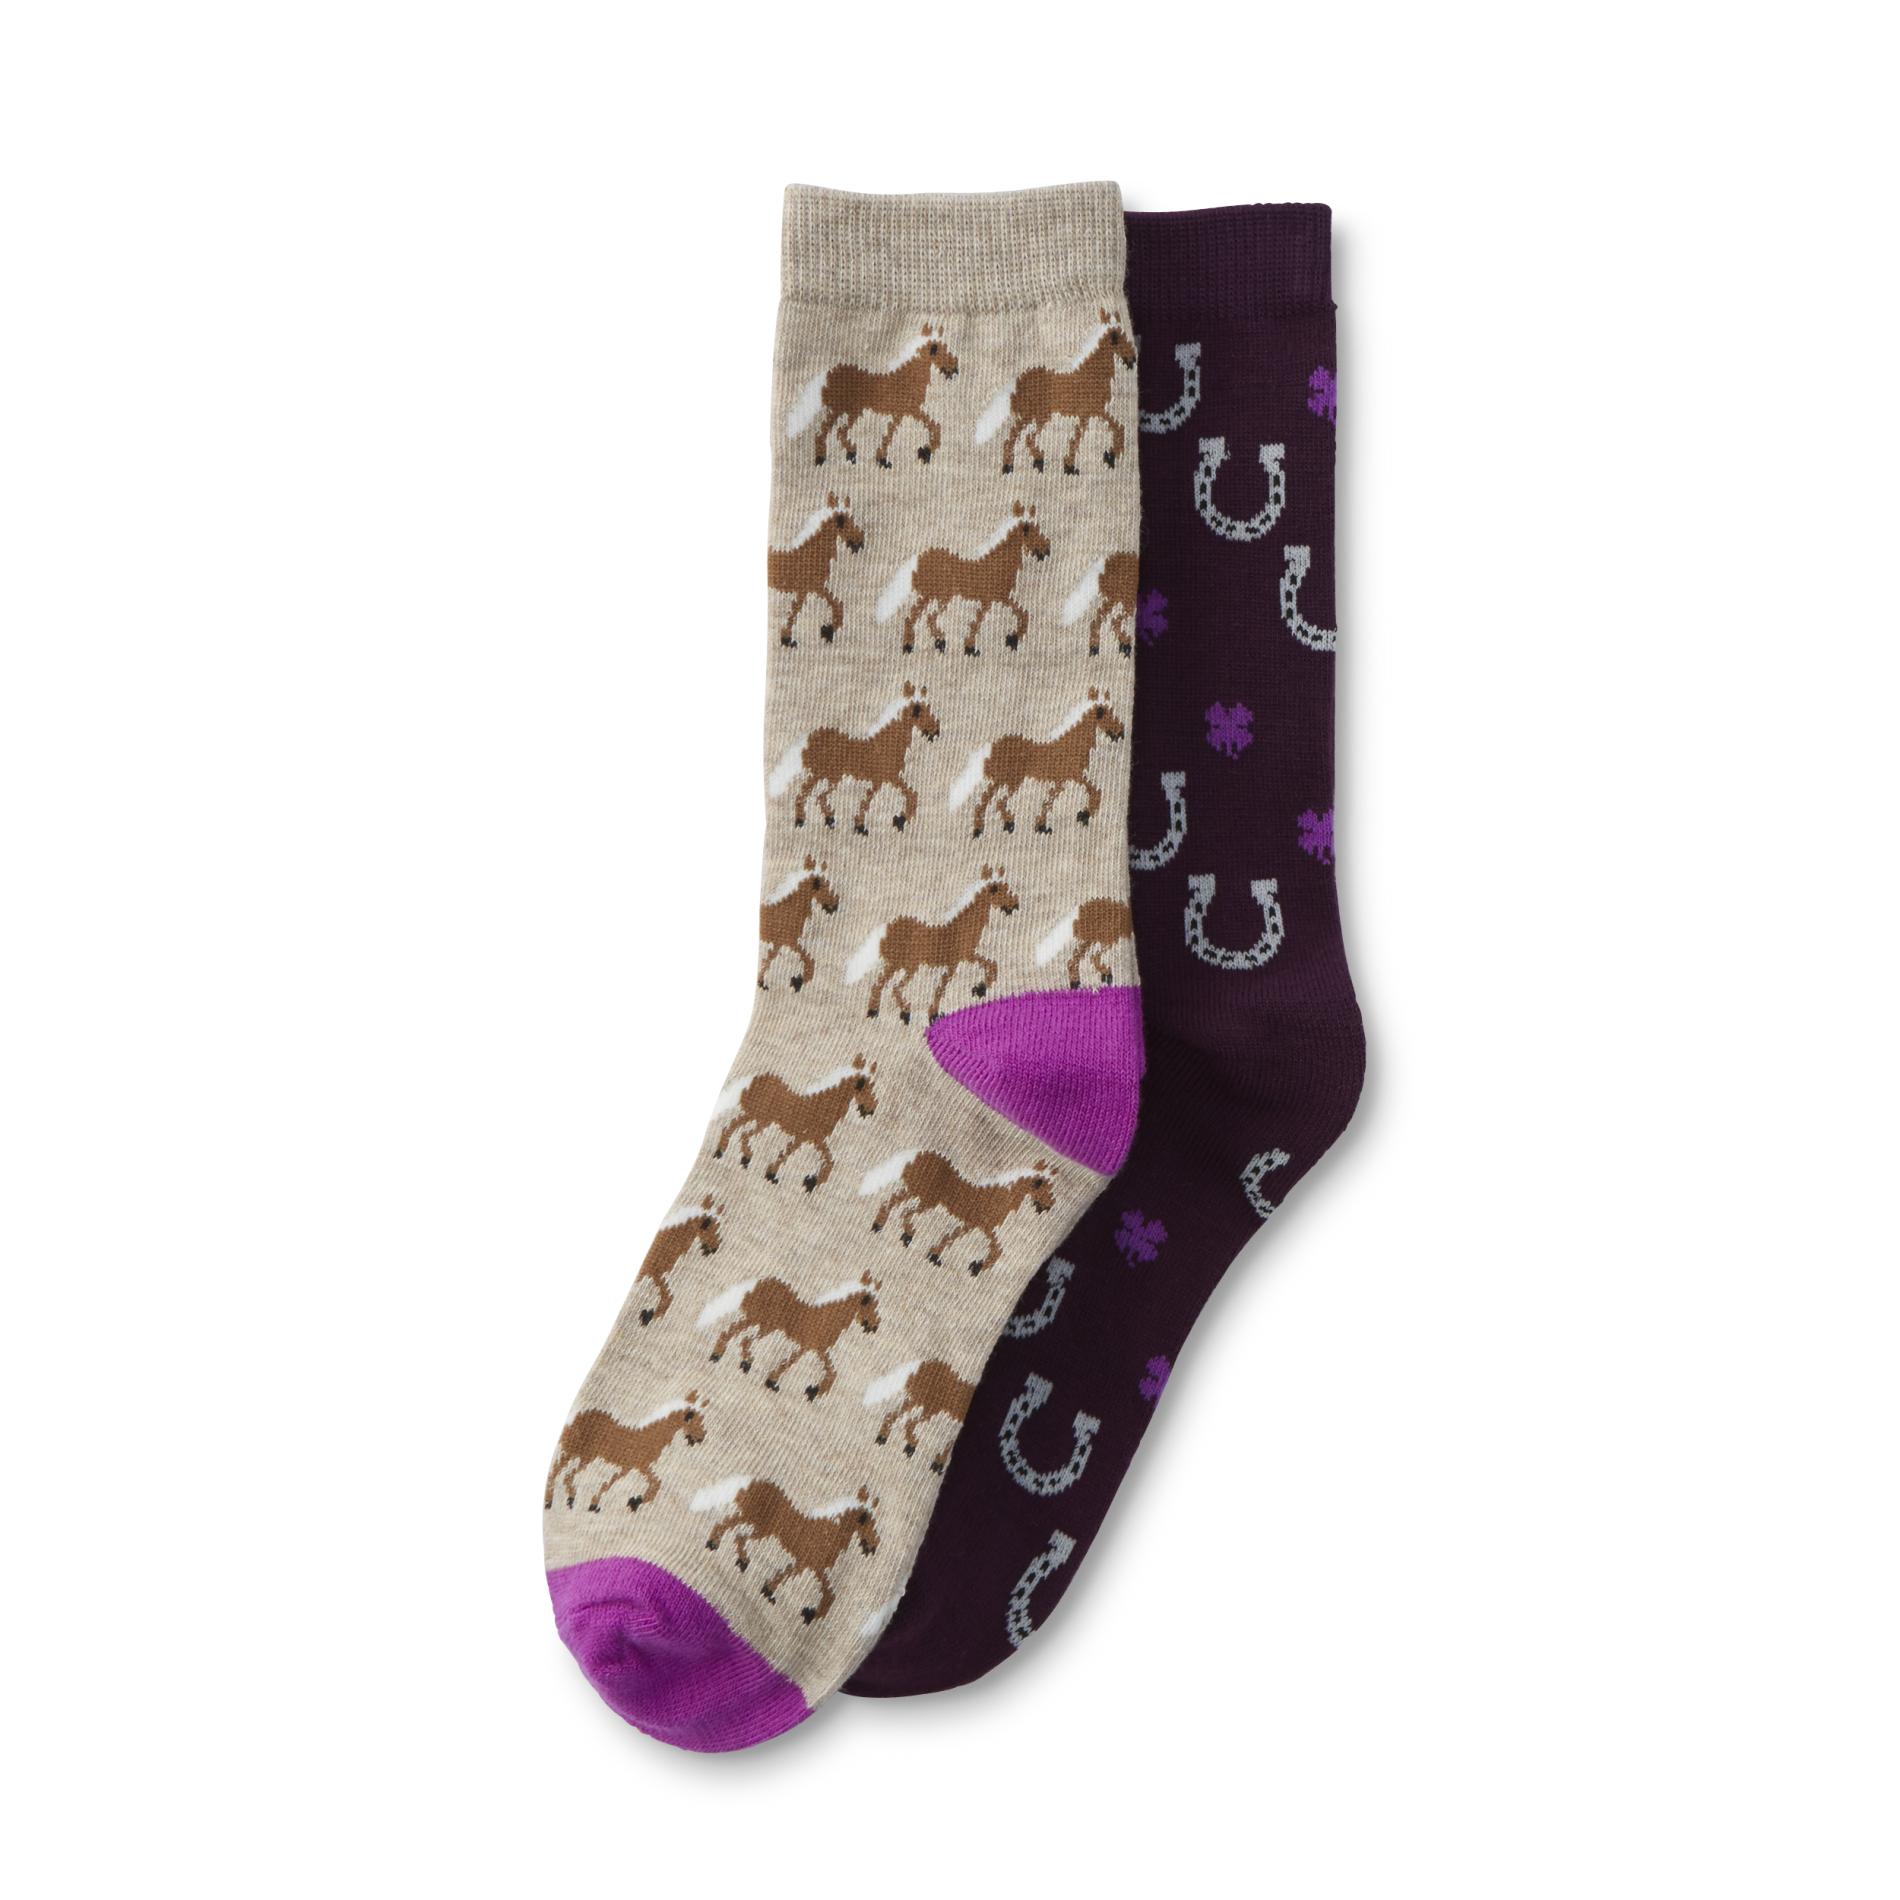 Womens socks with horses on them